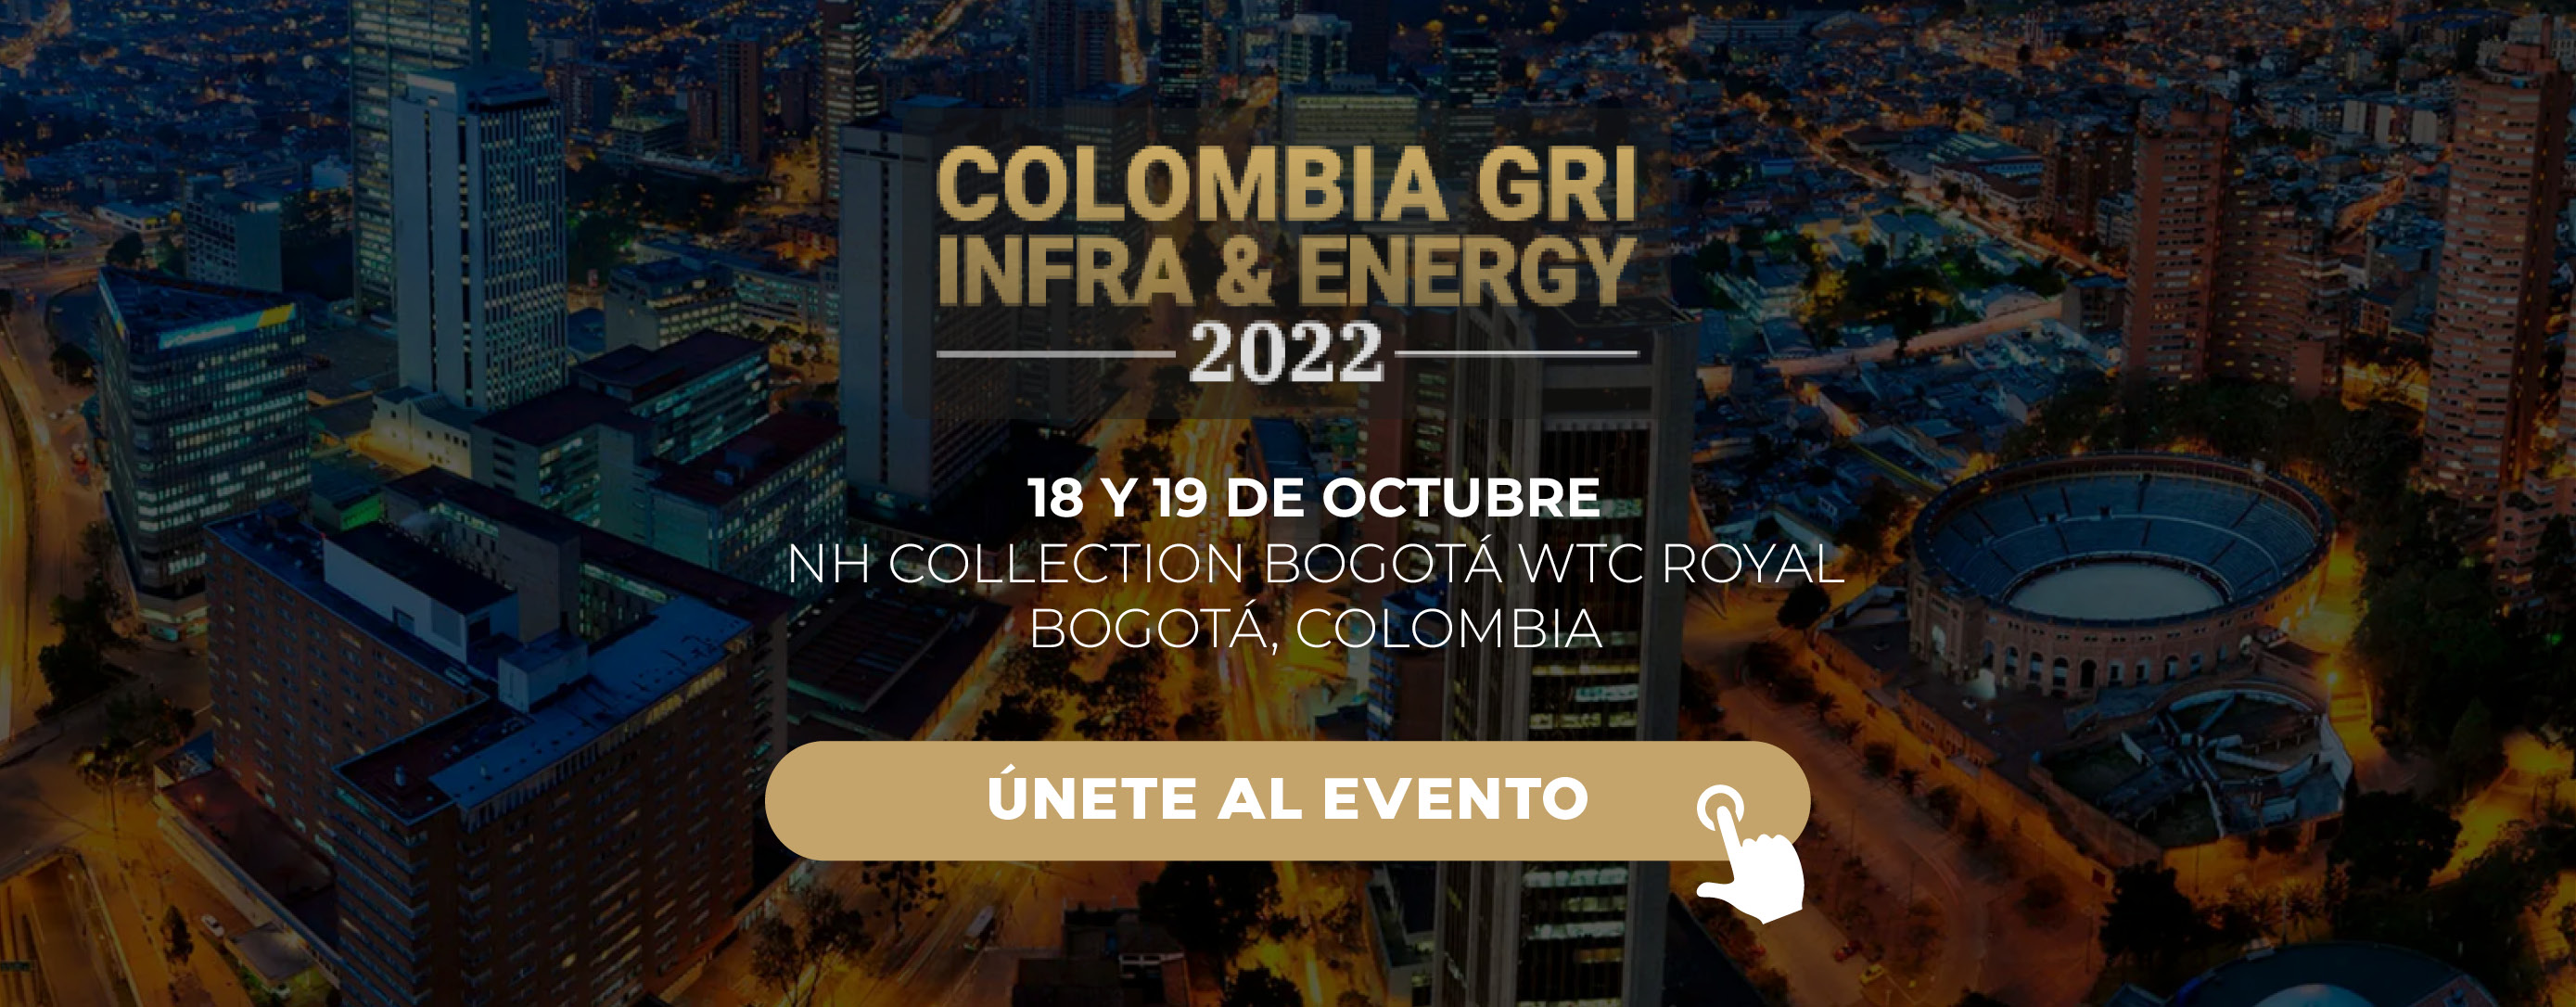 Colombia GRI Infra & Energy 2022